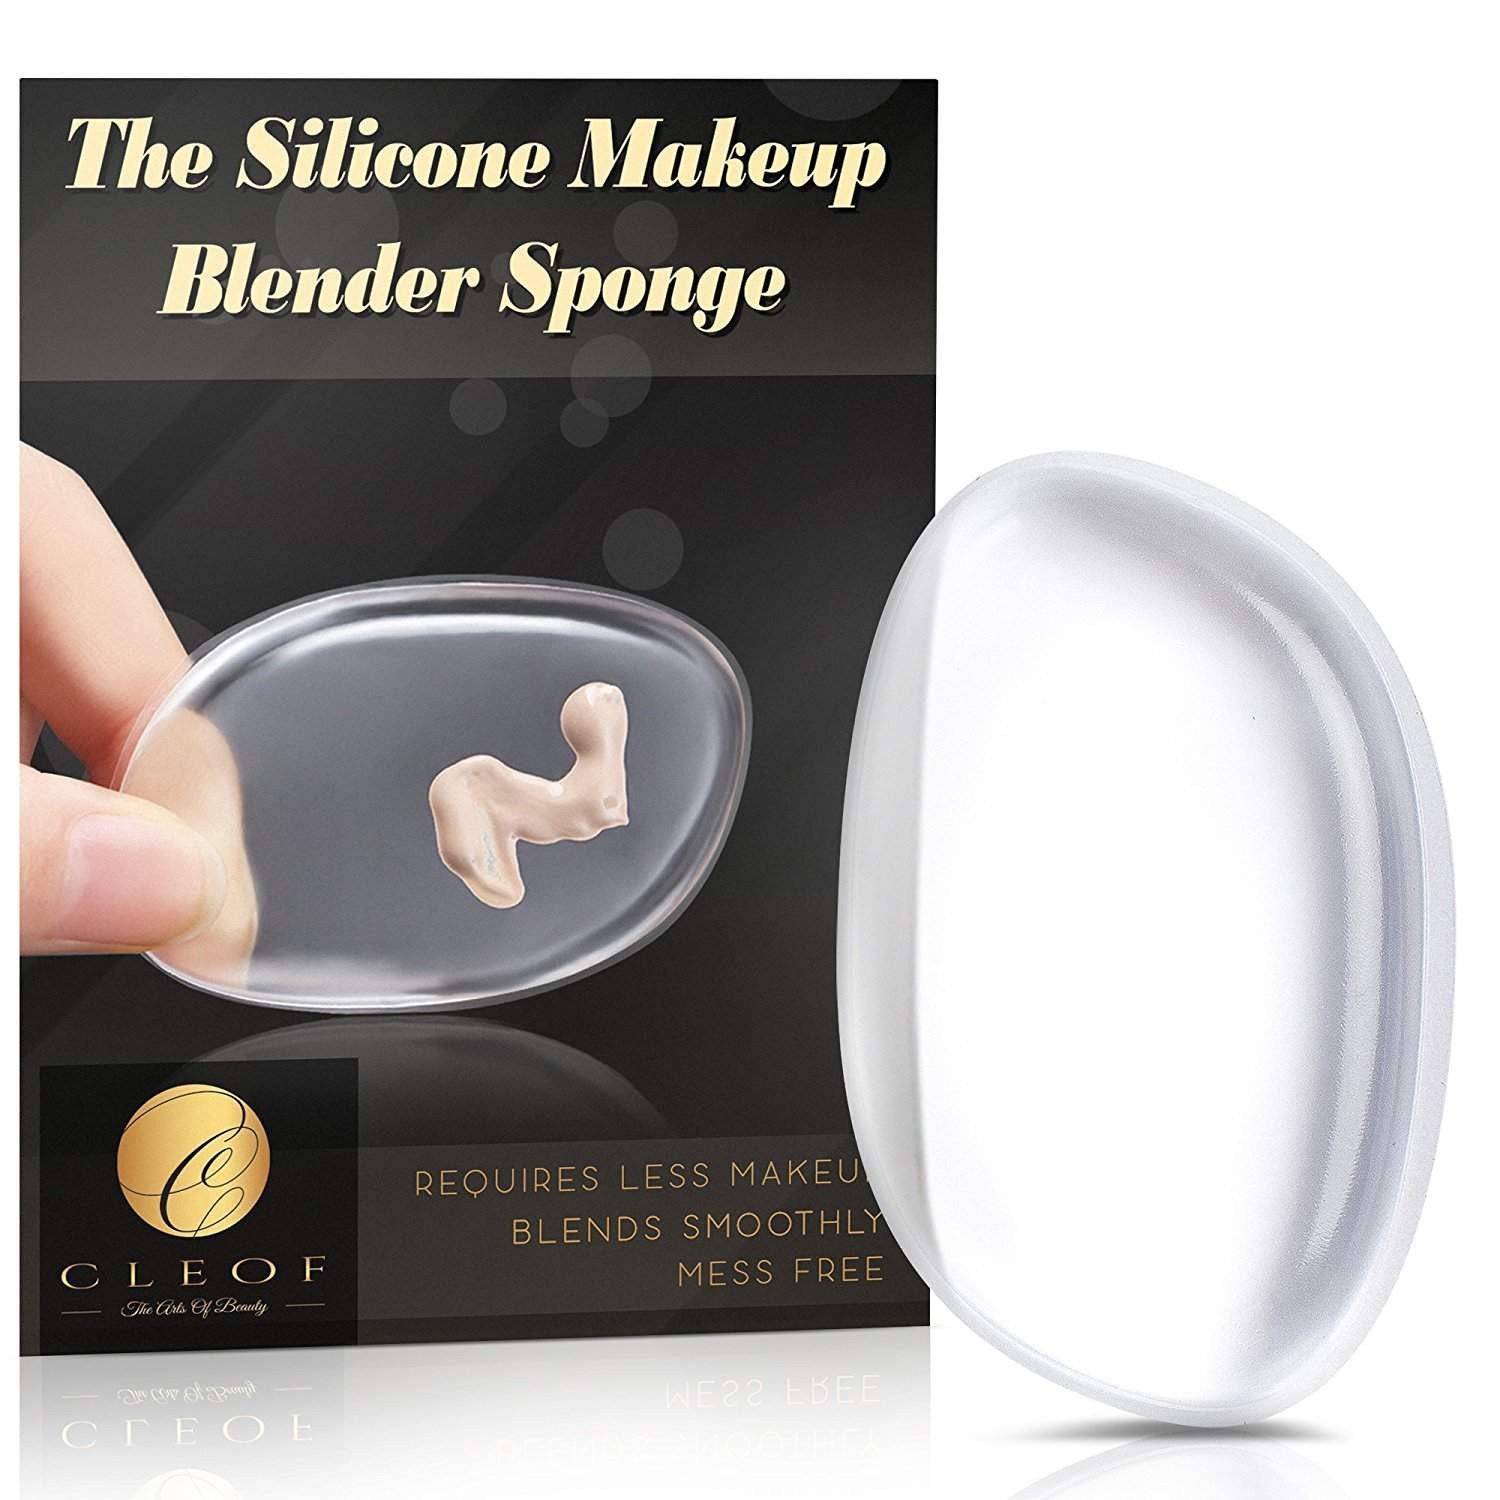 What Is a Silicone Sponge?